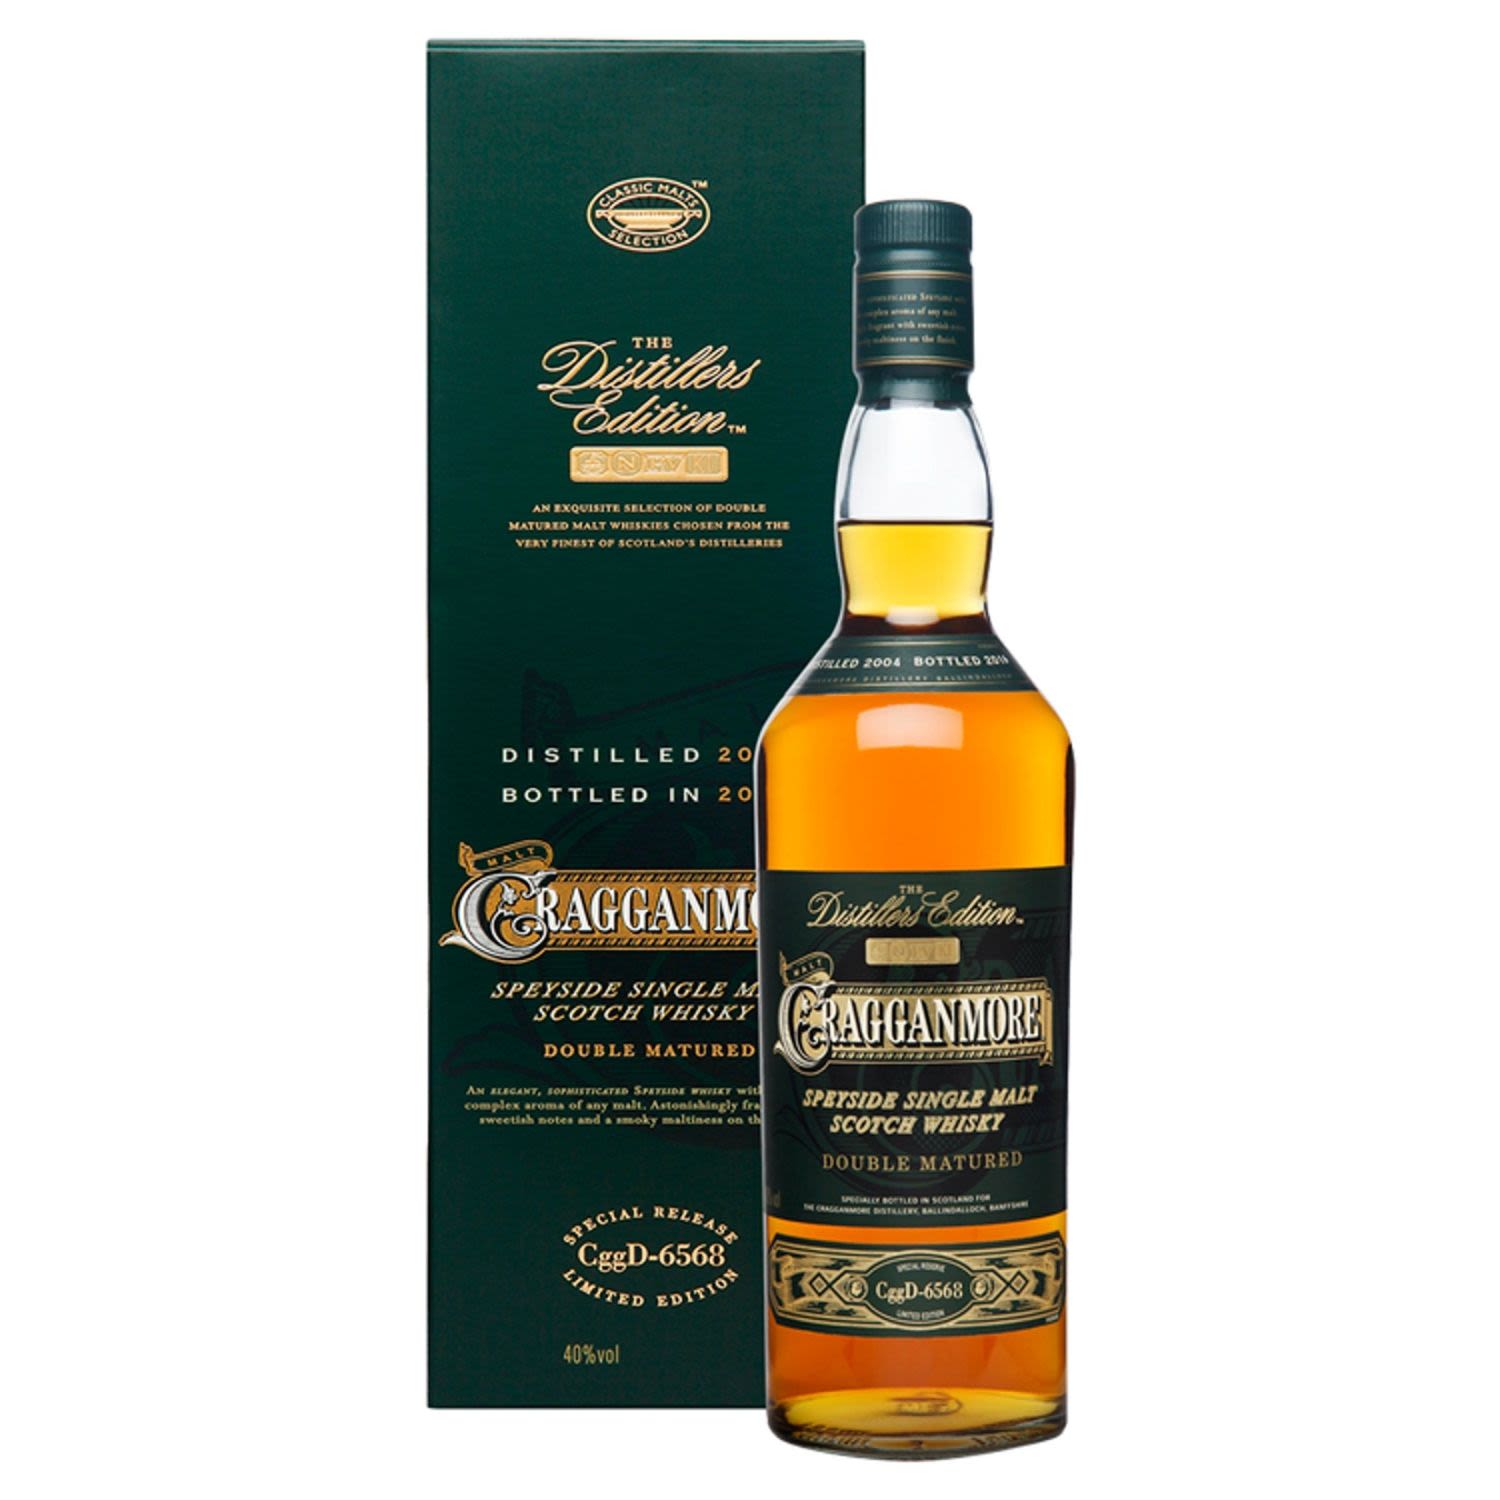 Cragganmore The Distillers Edition 2019 Single Malt Scotch Whisky 700mL Bottle